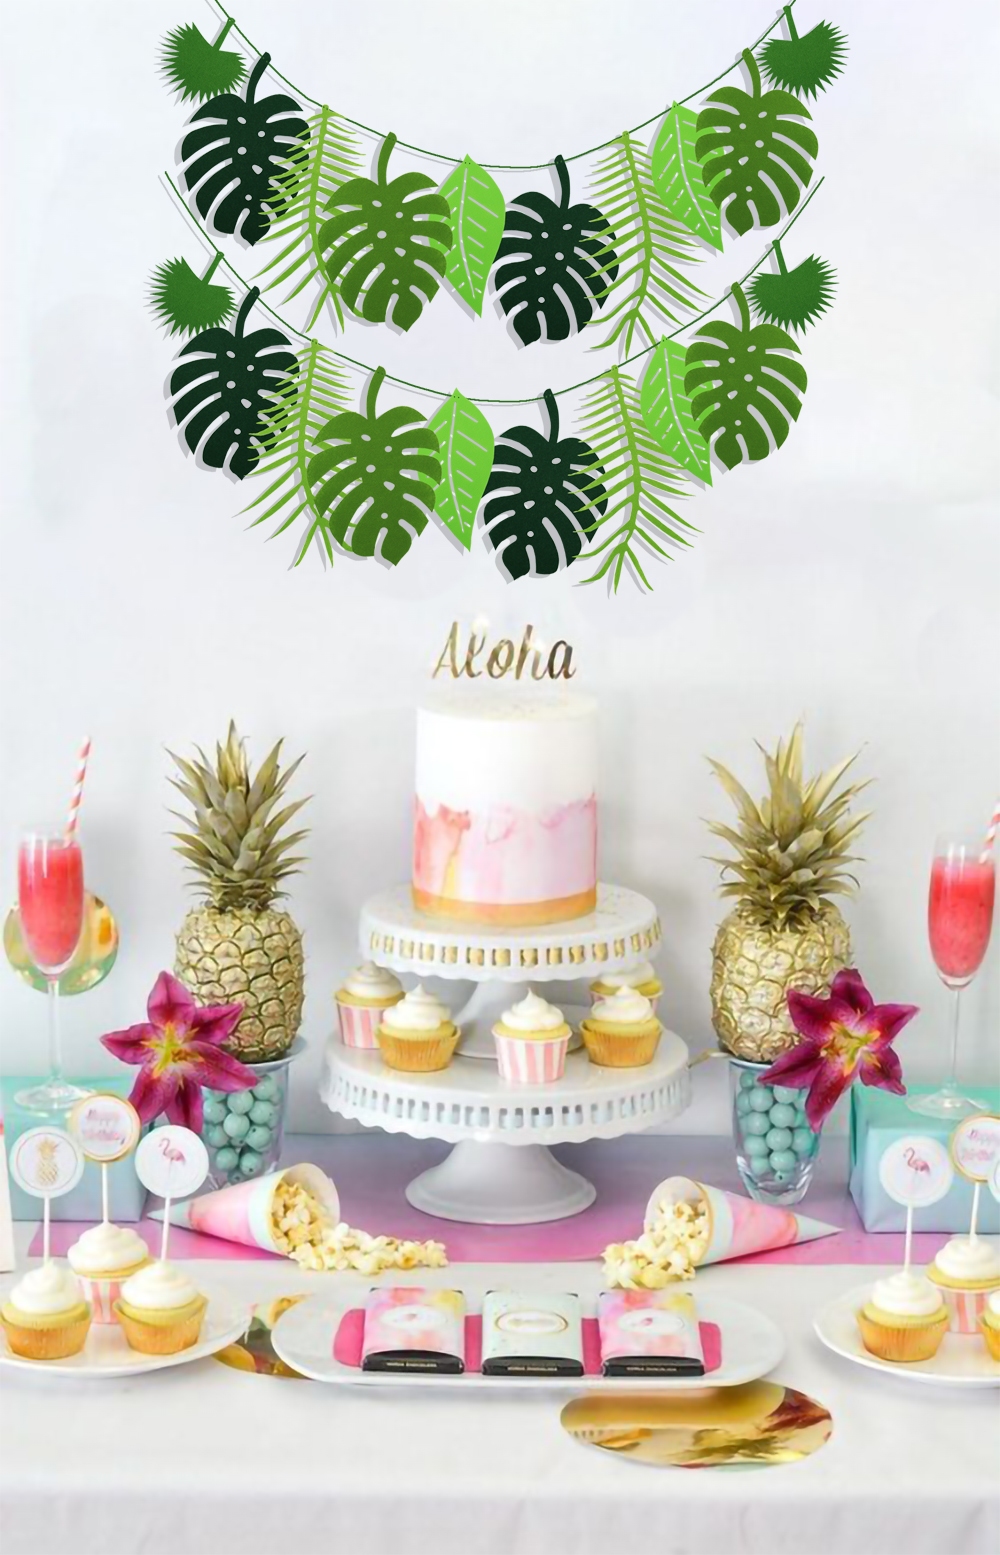 4 Pack Tropical Leaf Banner Hawaii Luau Party Leaves Garland Summer Beach Theme Wedding Birthday Party Decor - image 4 of 7